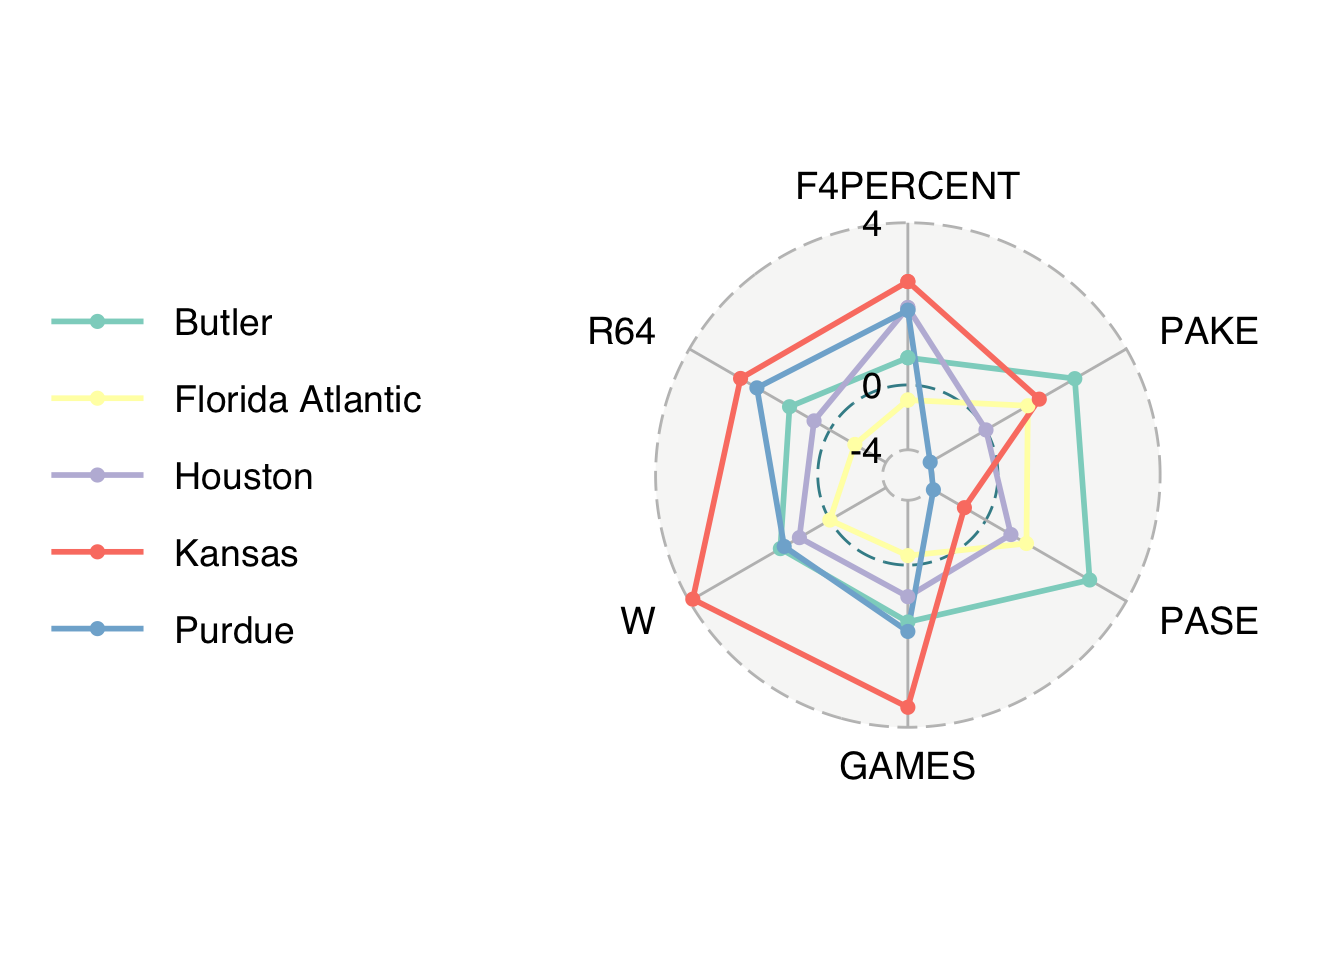 Radar plot on the following variables: times making it to the final four percent, PAKE, PASE, number of games played in the tournament, number of wins in the tournament, and number of times to the round of 64.  Kansas has extremely large z-score for number of wins, especially compared to the percent of times they made it to the final four. Butler had very high PAKE and PASE, but much lower percent of times they made it to the final four.